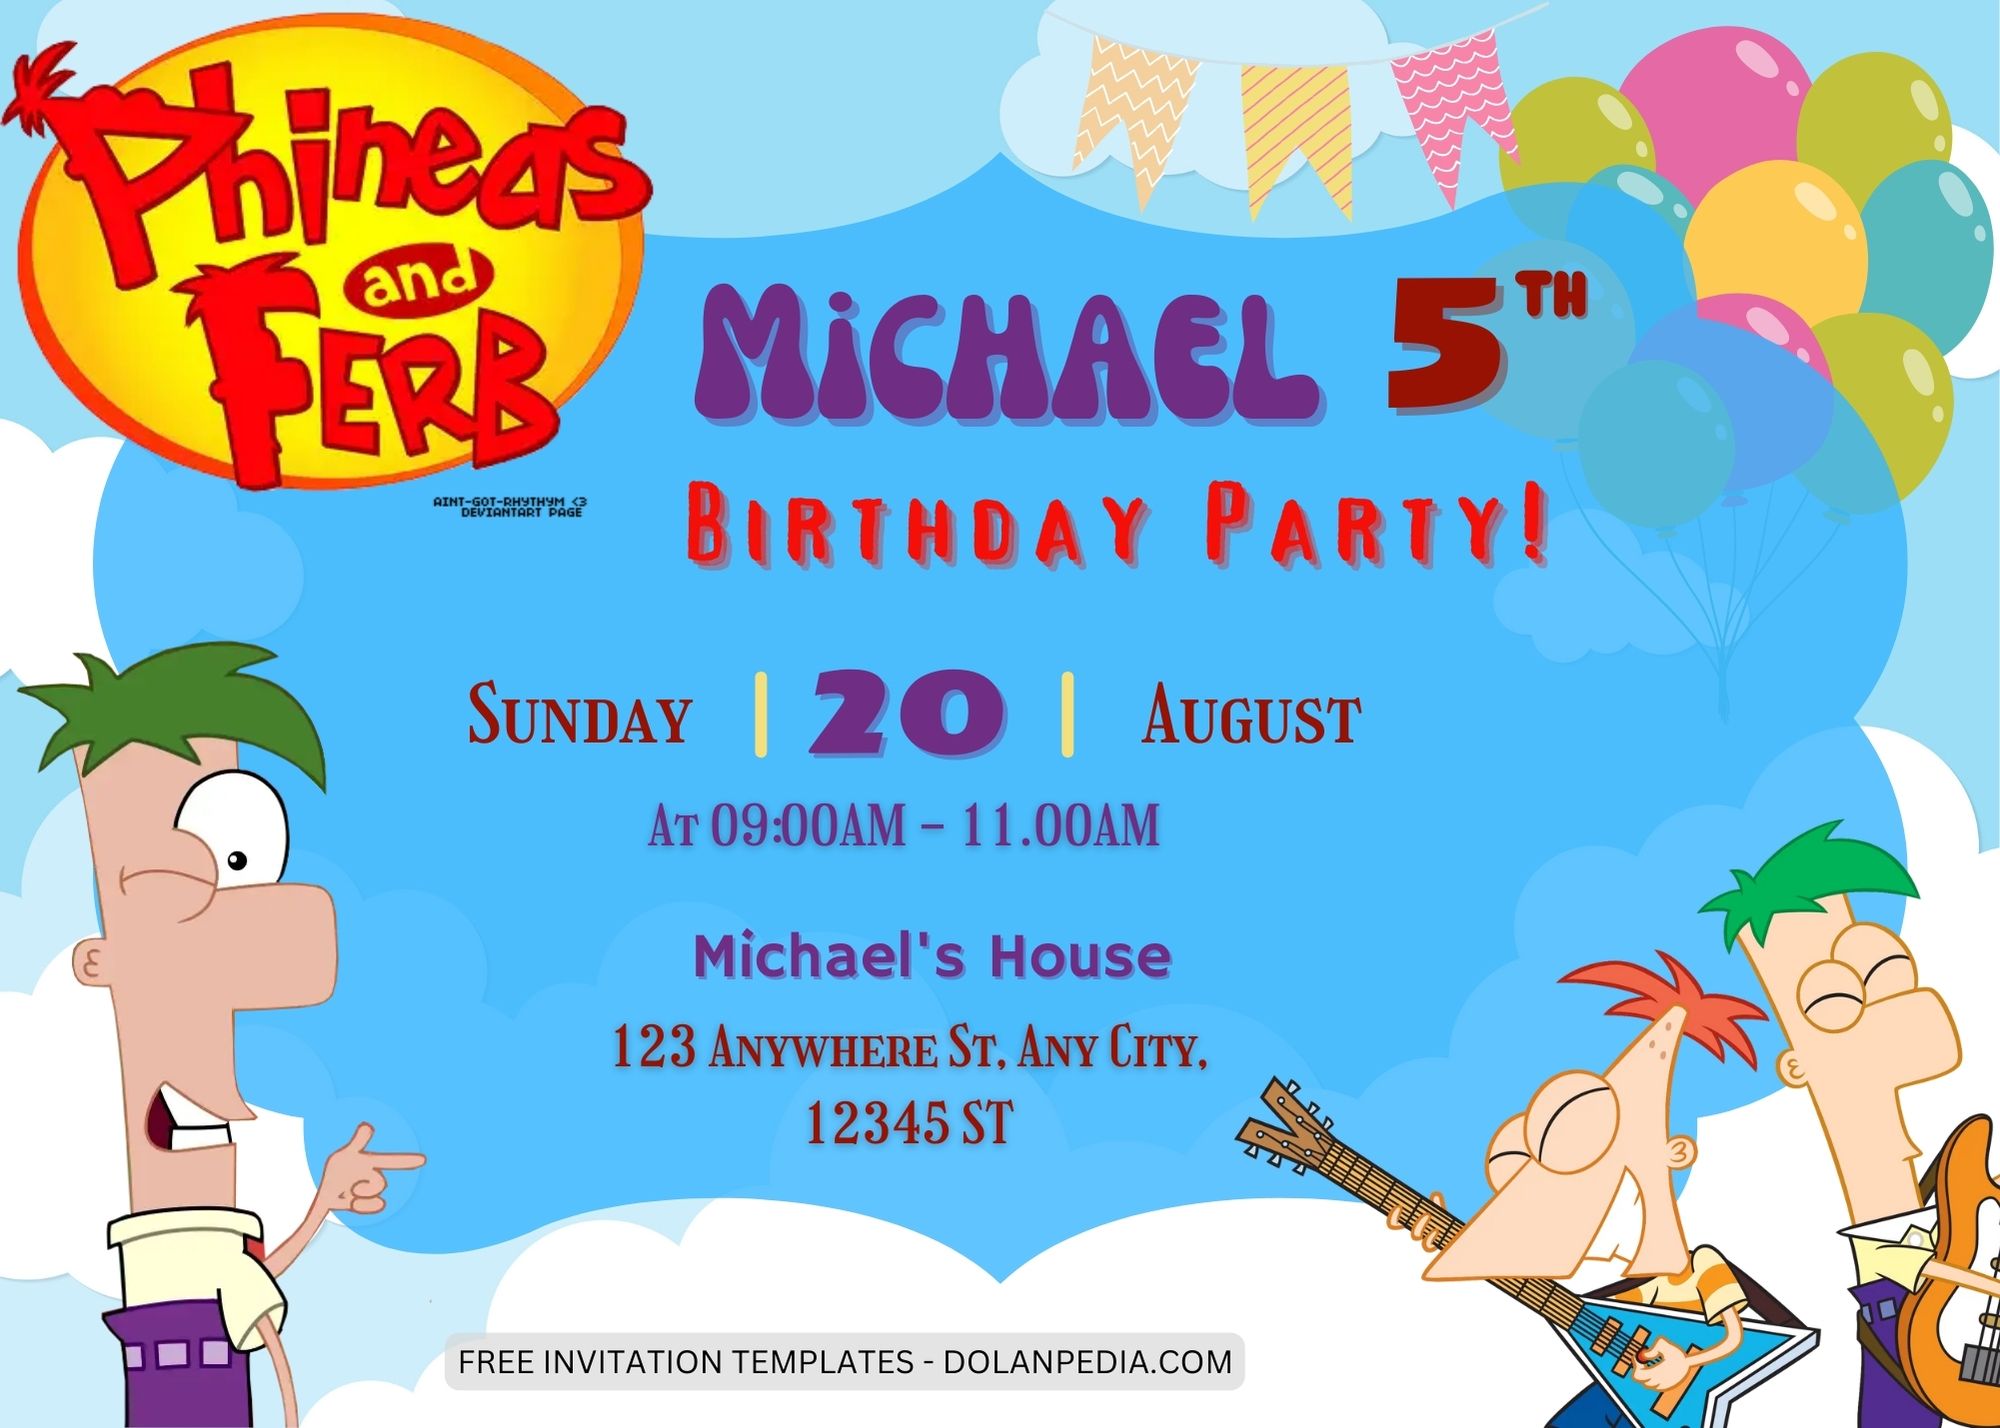 9+ Phineas and Ferb Birthday Invitation Templates Title